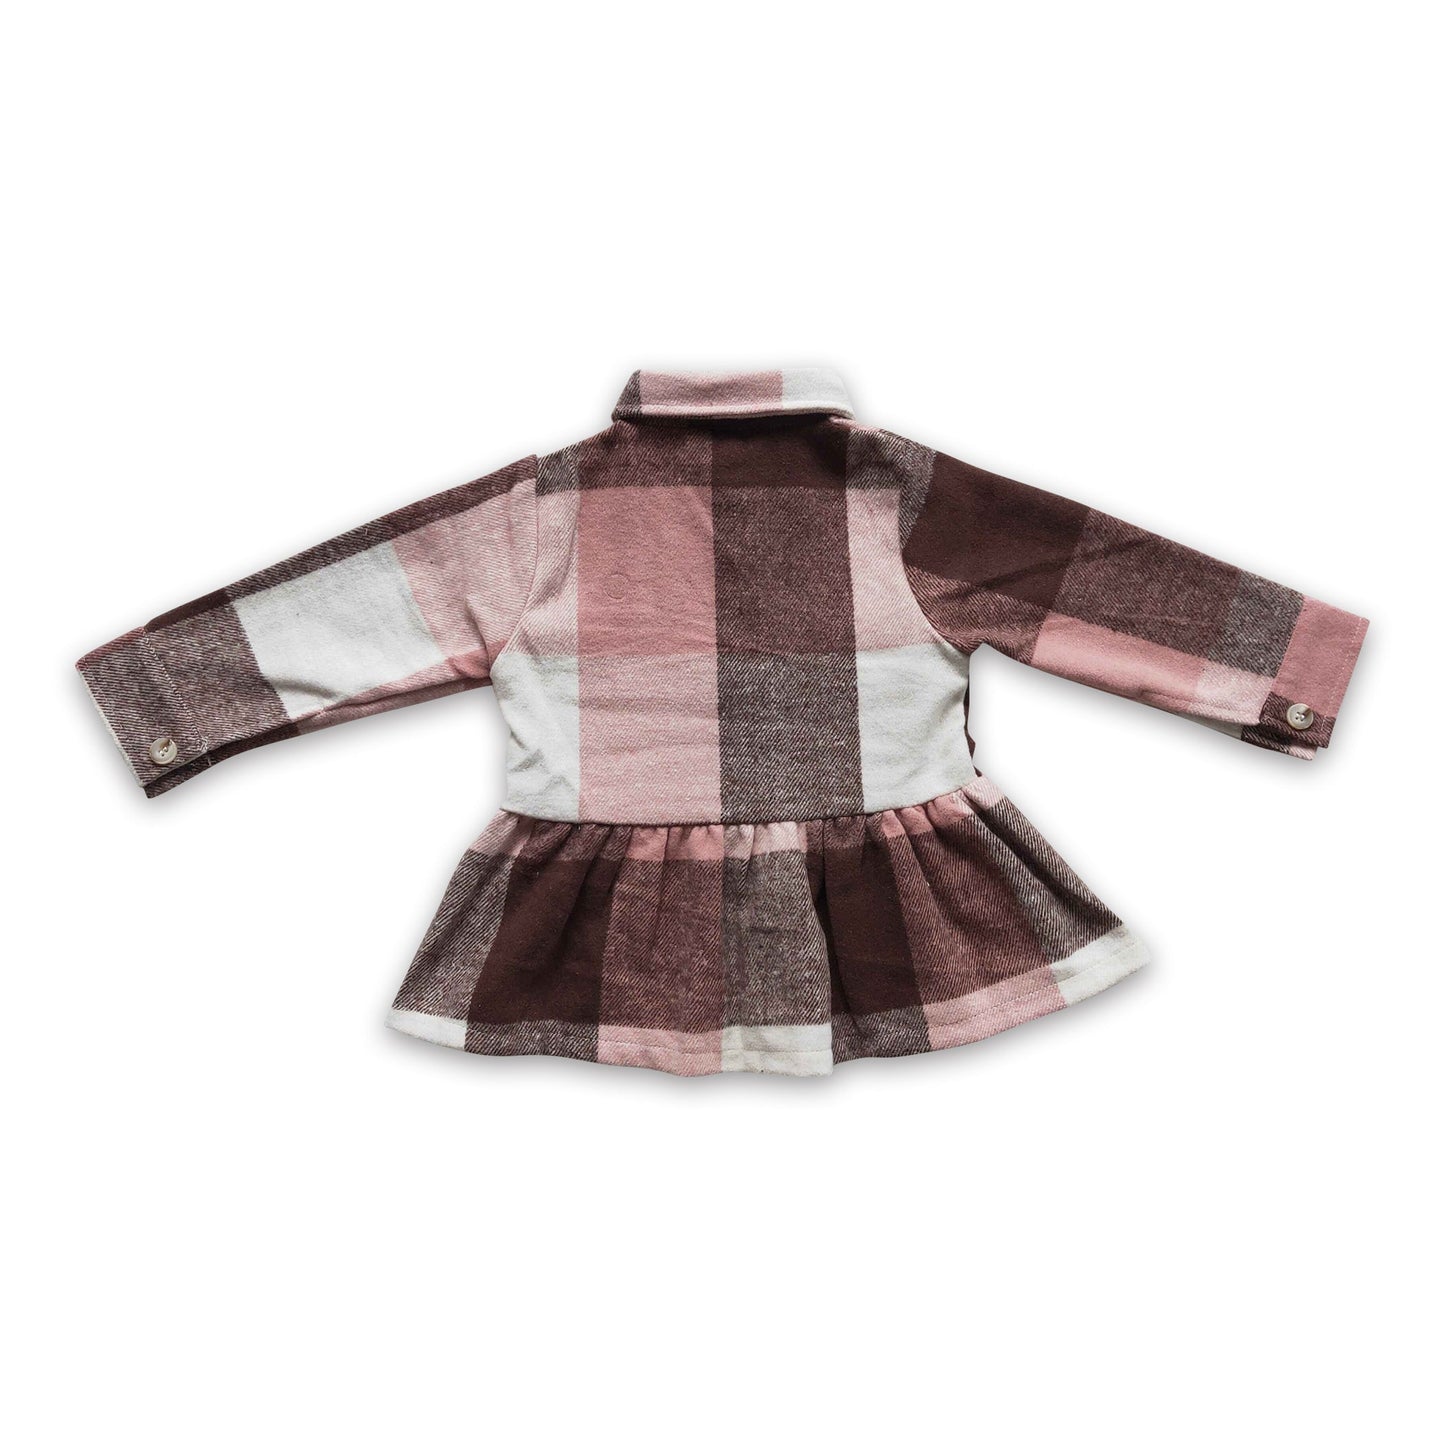 Pink plaid cotton shirt baby girls thick flannel button up ruffle shirt